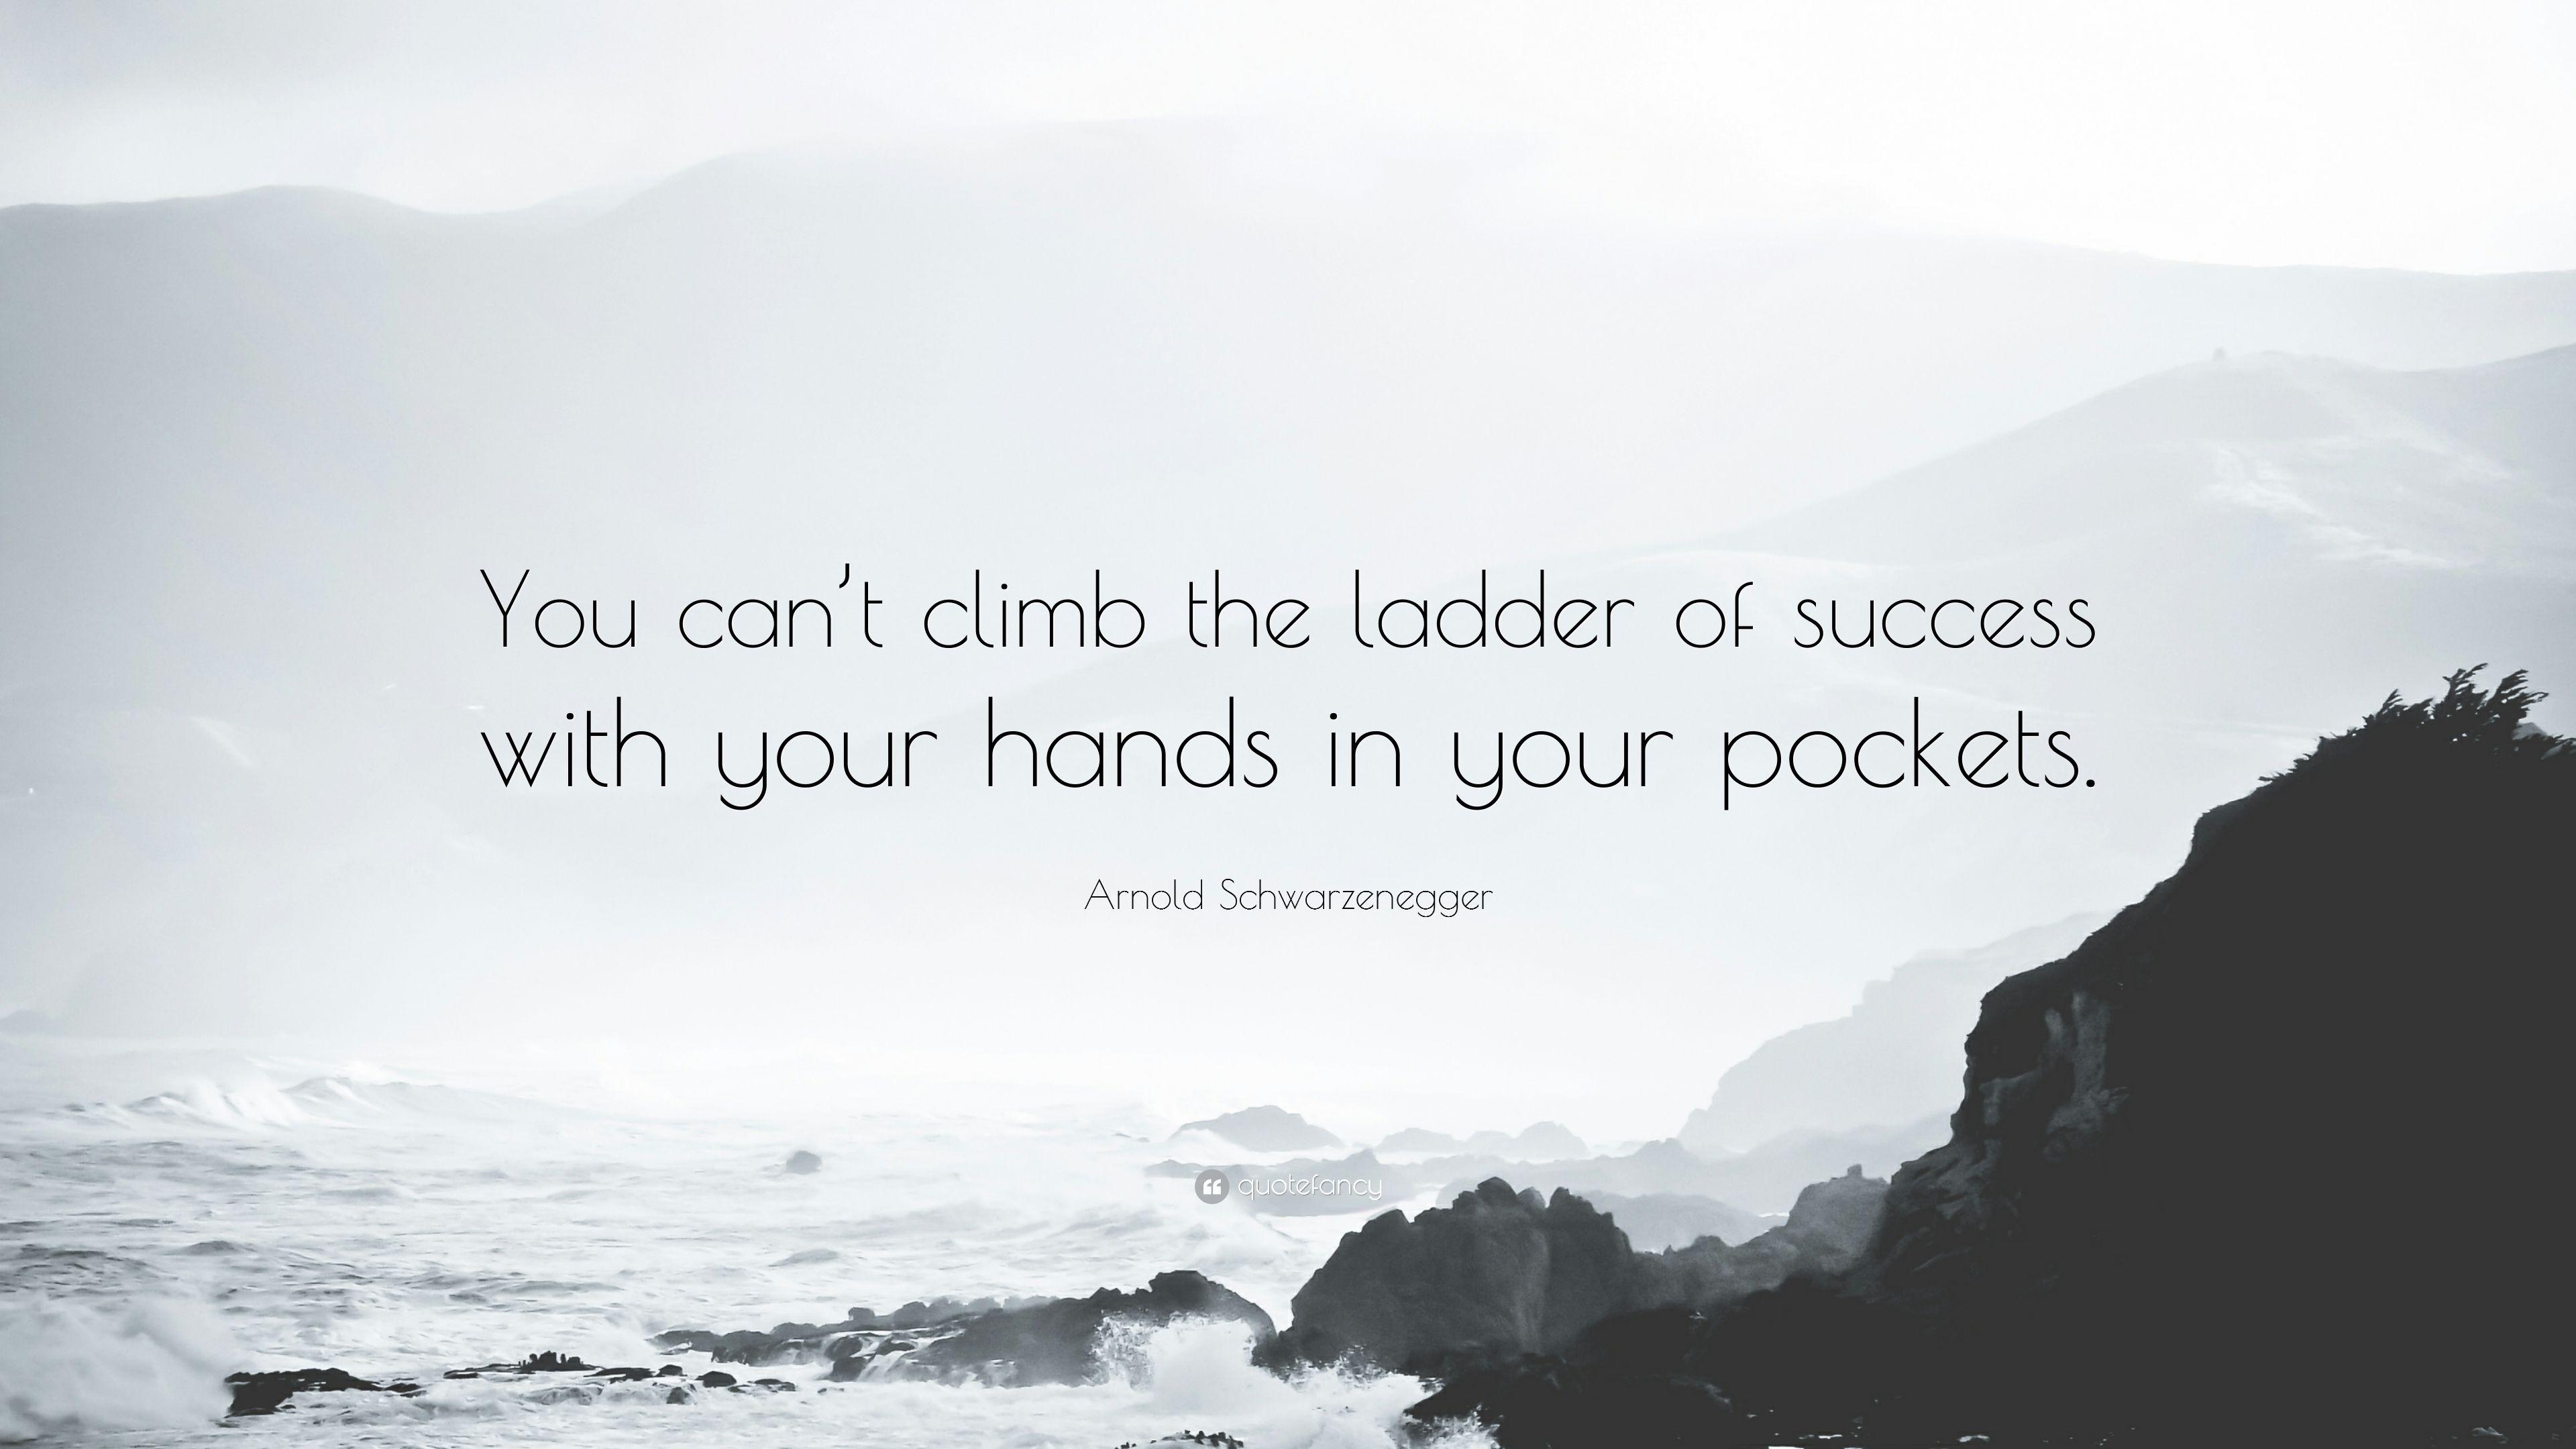 Arnold Schwarzenegger Quote: “You can't climb the ladder of success